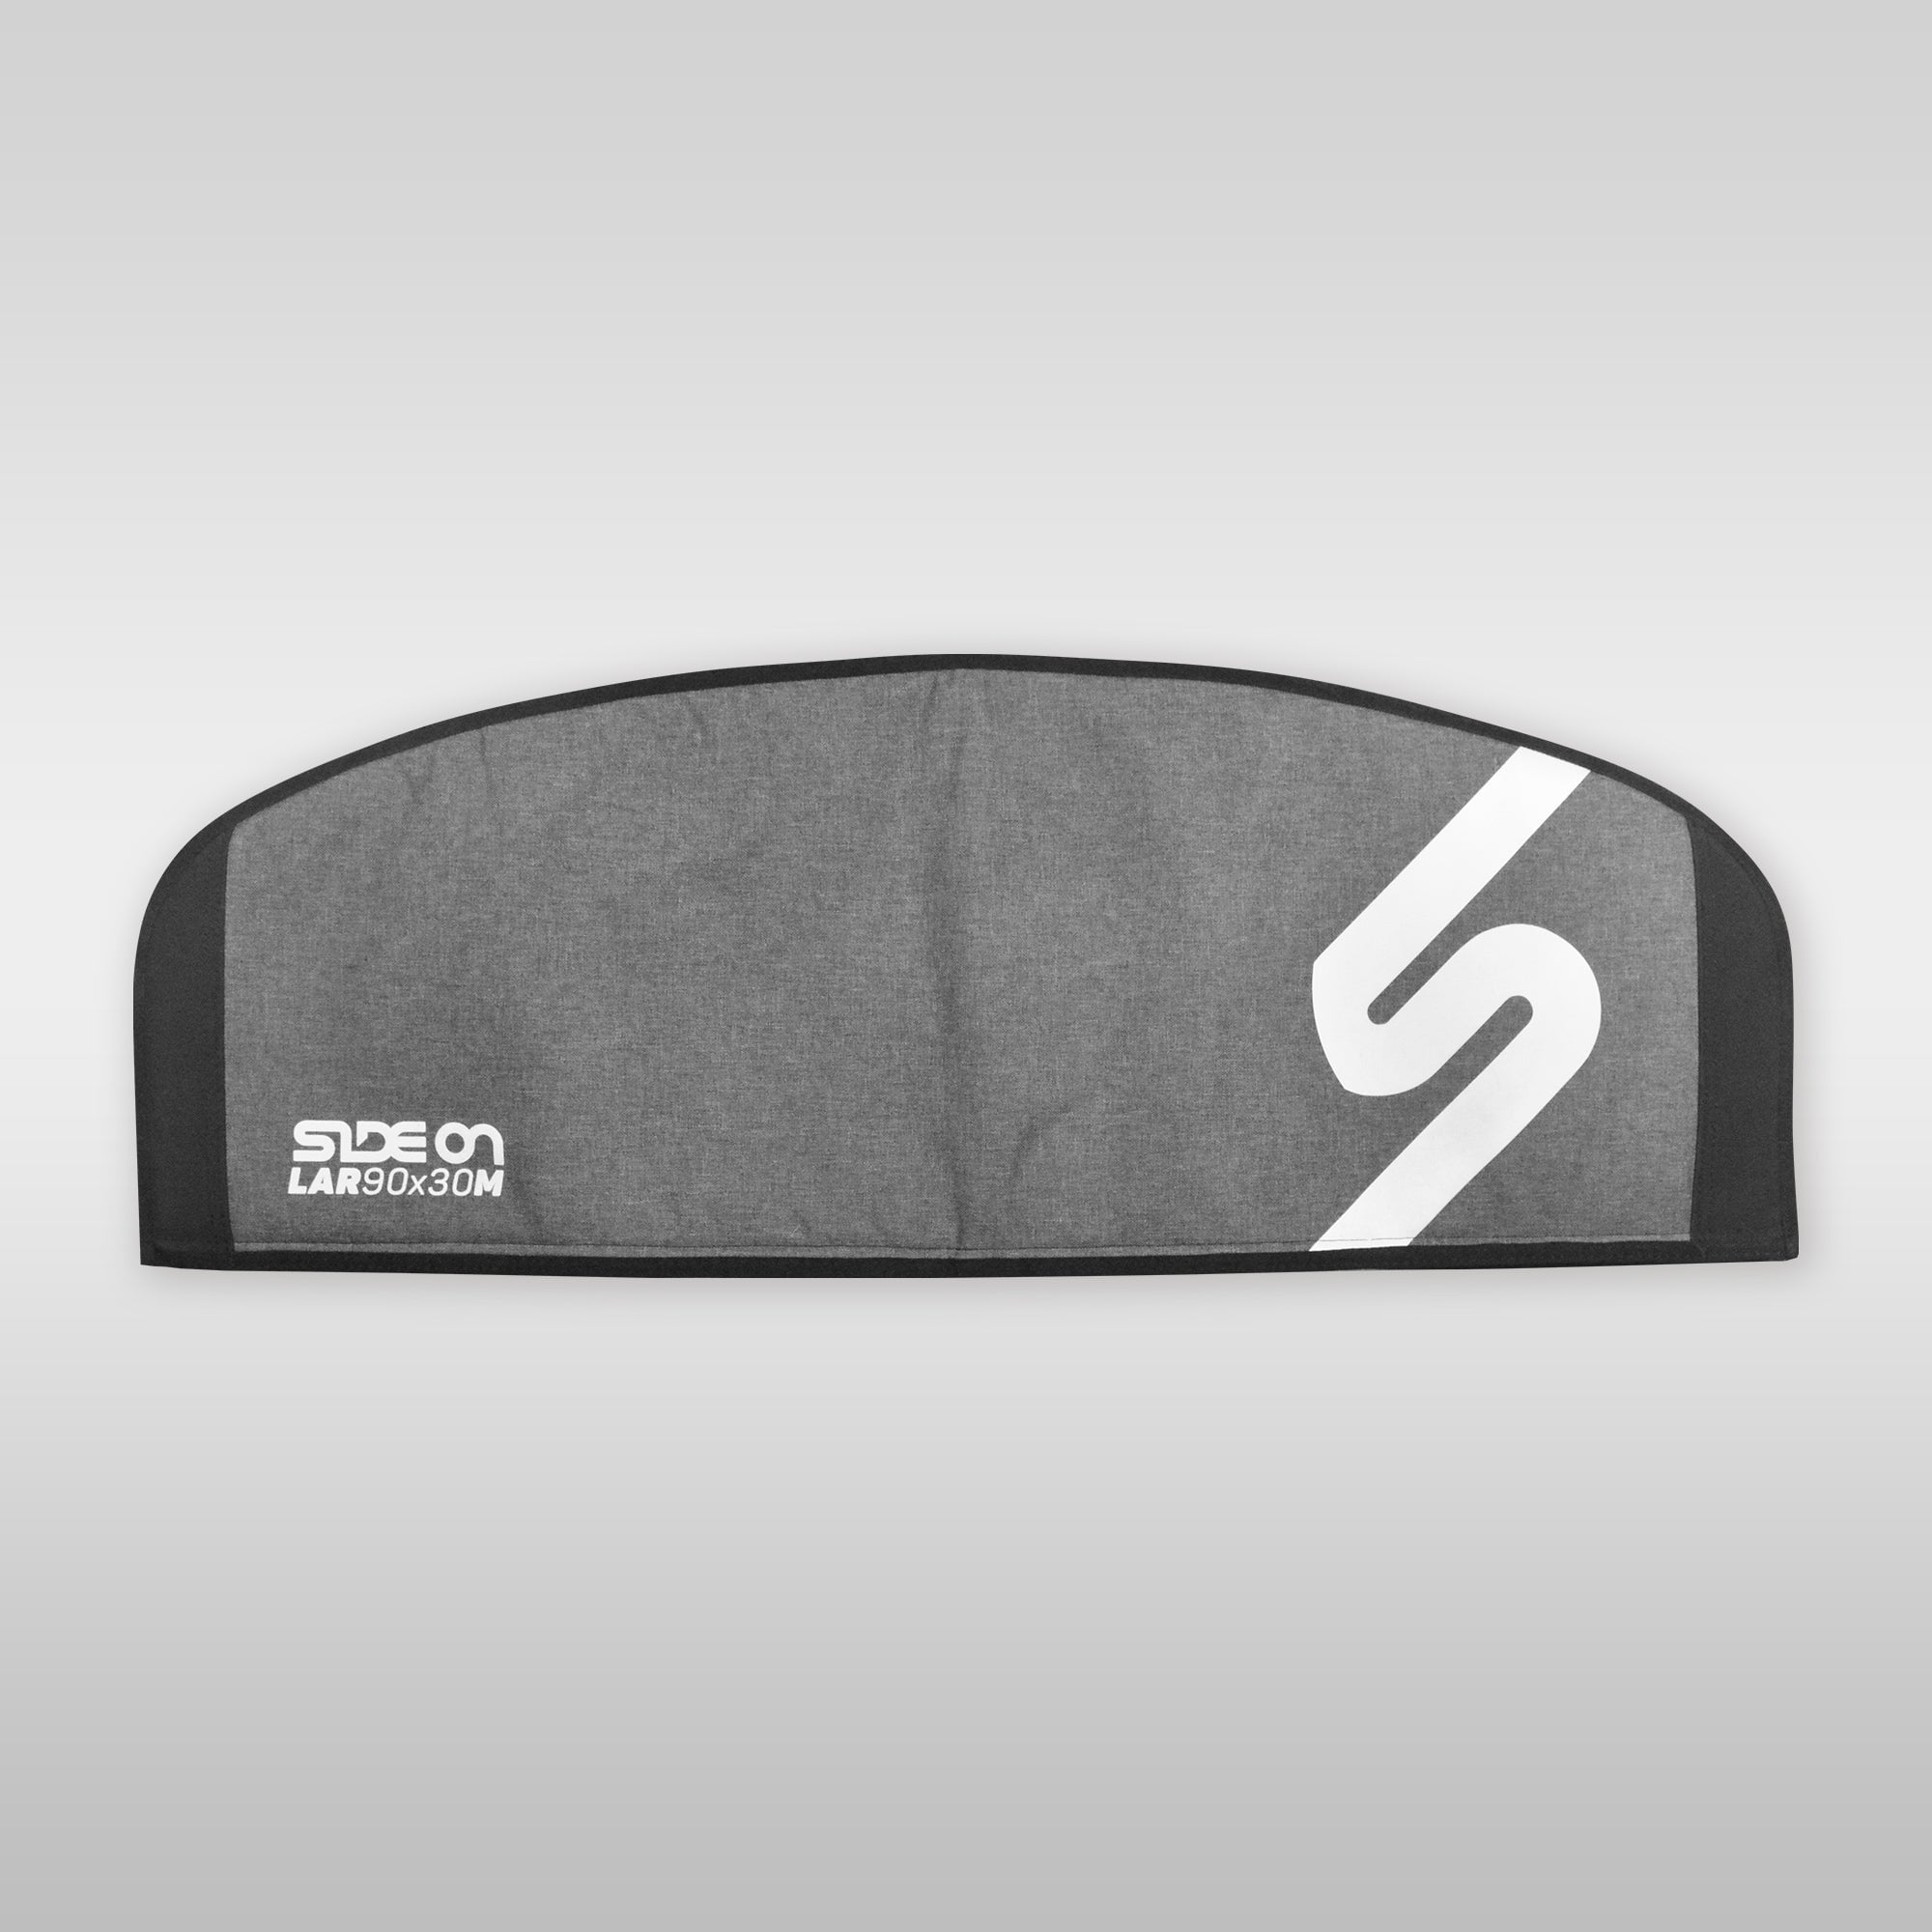 SideOn Side-On Frontwing Cover Bag wingfoil Bag Protection